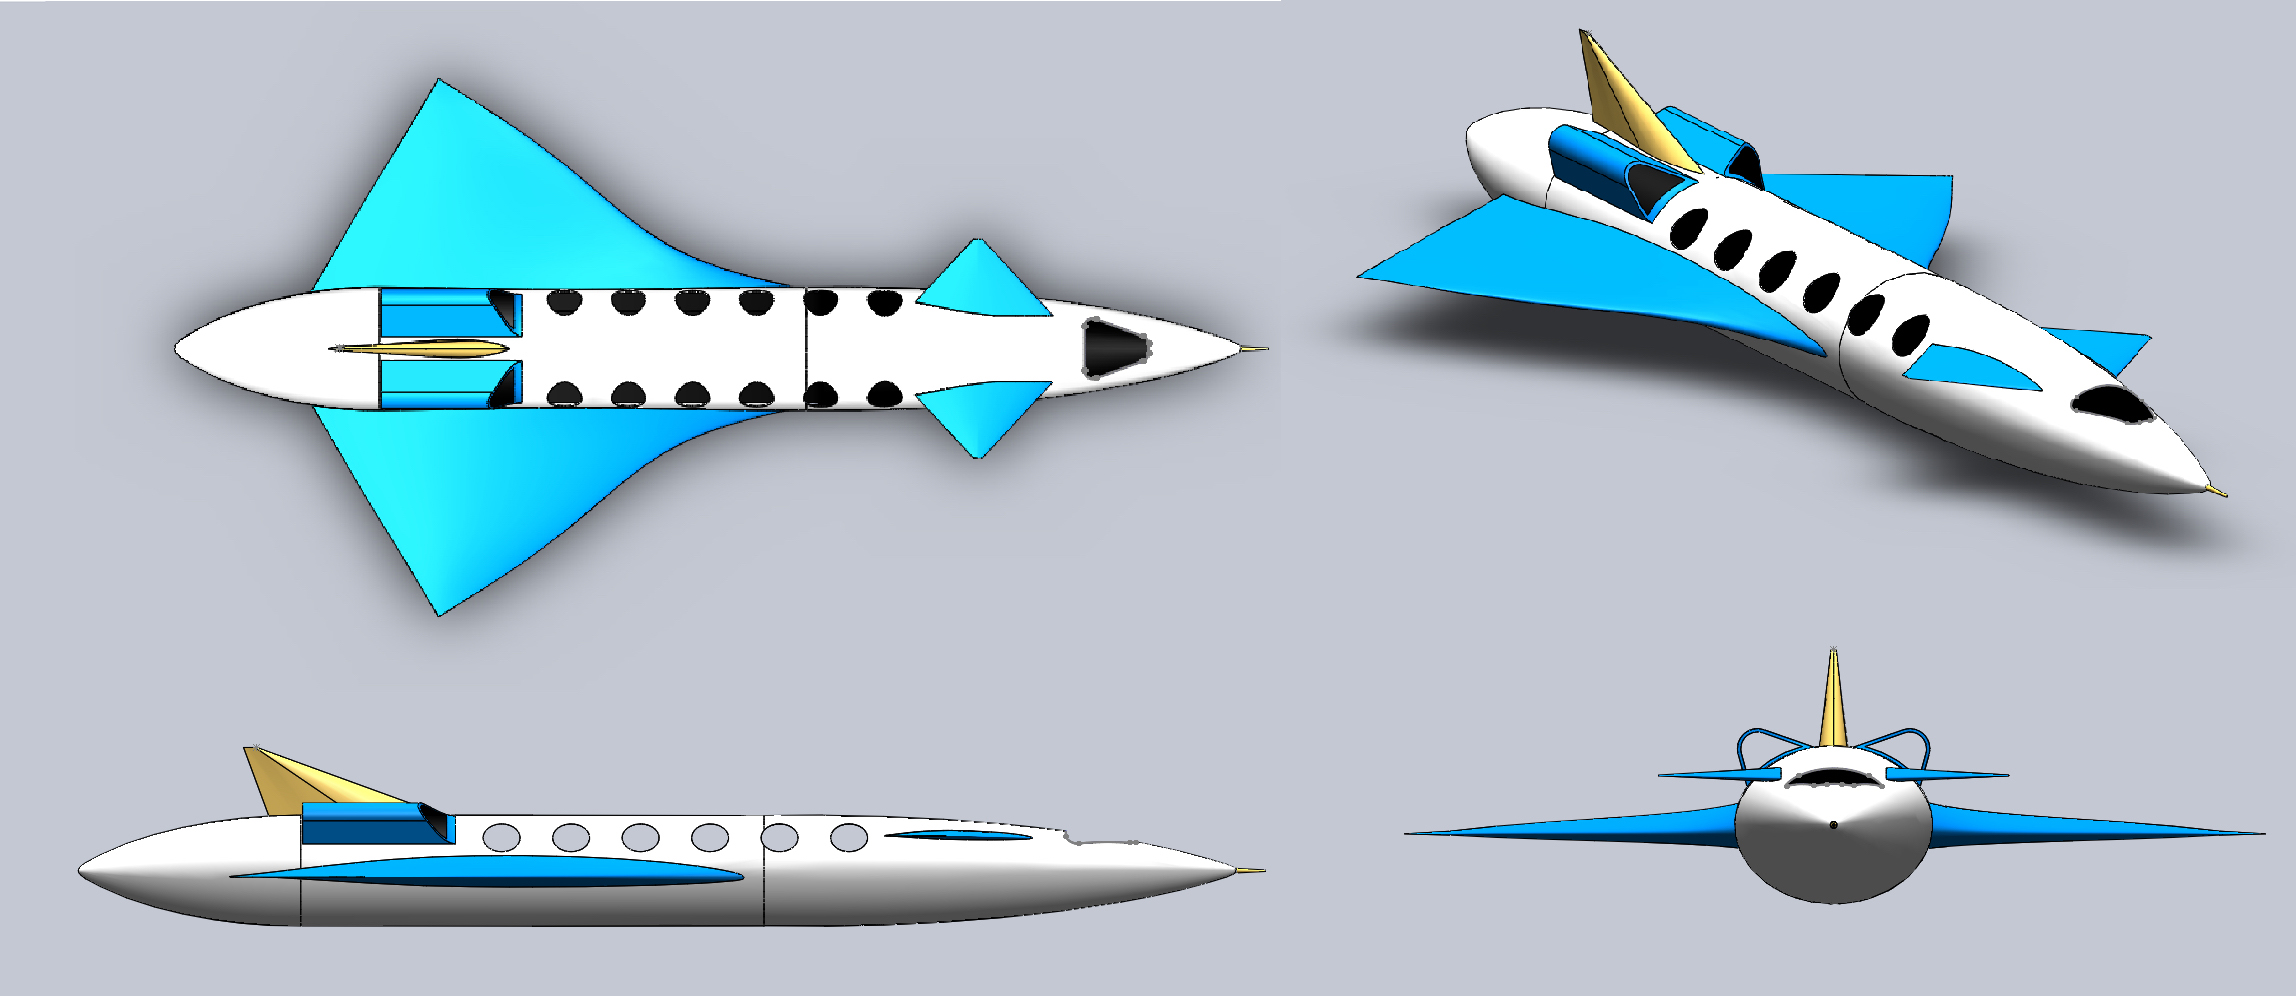 Artist illustration showing four configurations of the Goldeneye AB1 aircraft.